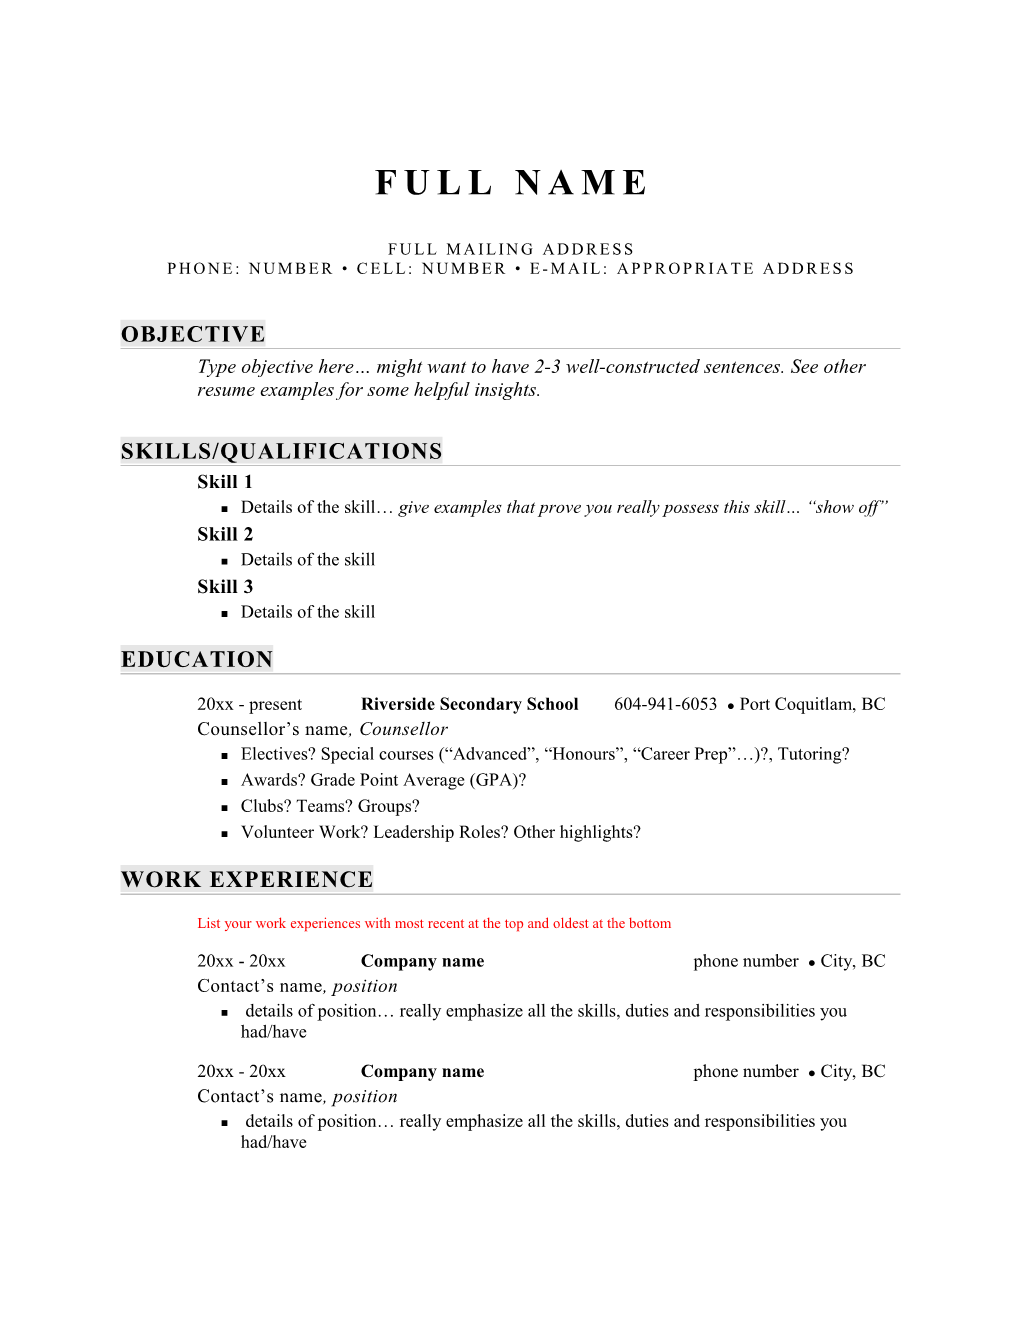 Resume of Your Name Page 1 of 2